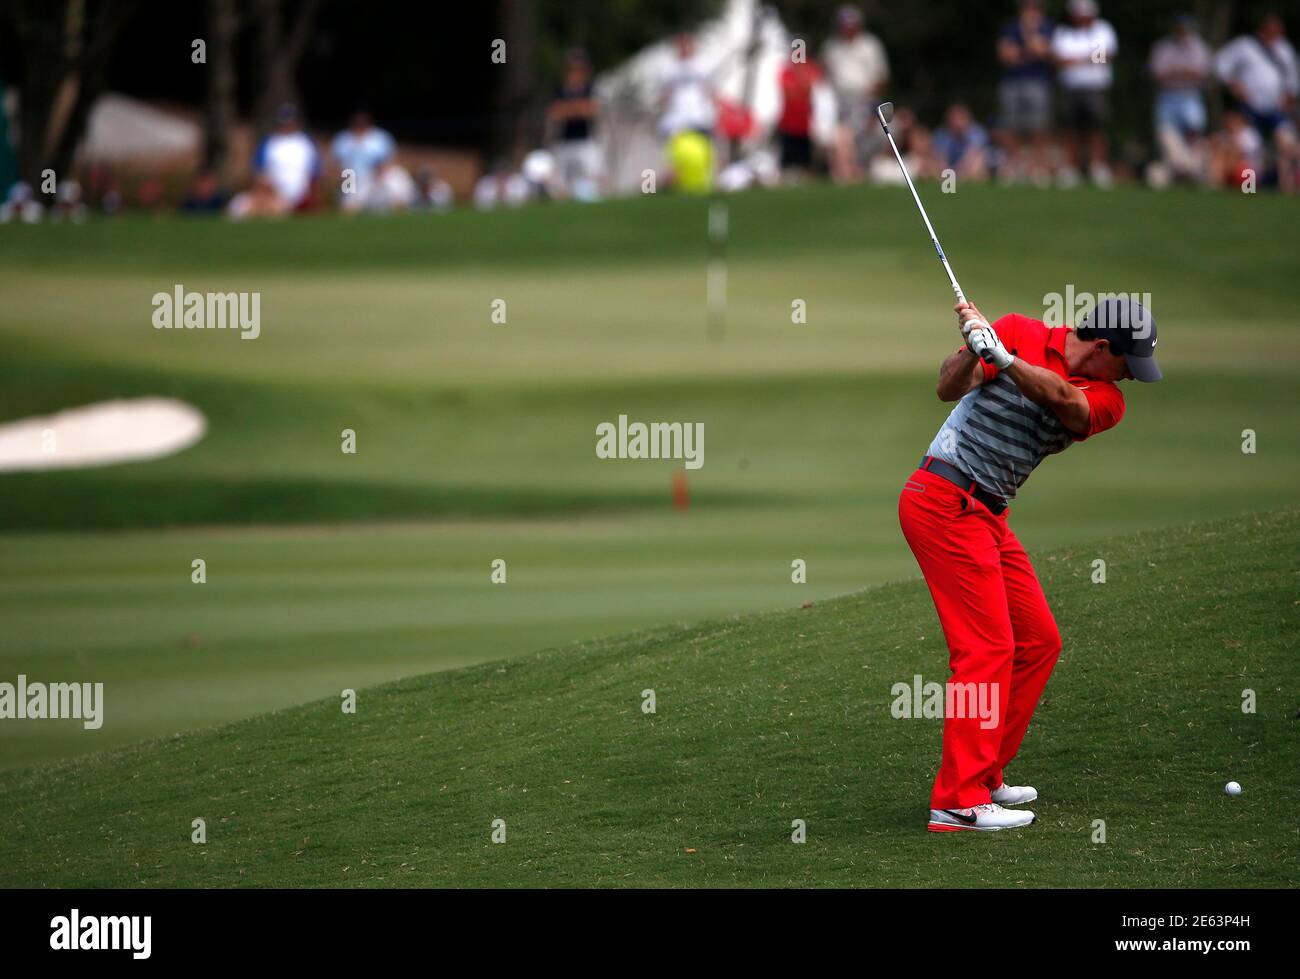 World number one and defending champion Rory McIlroy of Northern Ireland hits a shot on the 17th hole during the fourth and final round of the Australian Open golf tournament at The Australian Golf Club in Sydney November 30, 2014.    REUTERS/David Gray      (AUSTRALIA - Tags: SPORT GOLF) Stock Photo